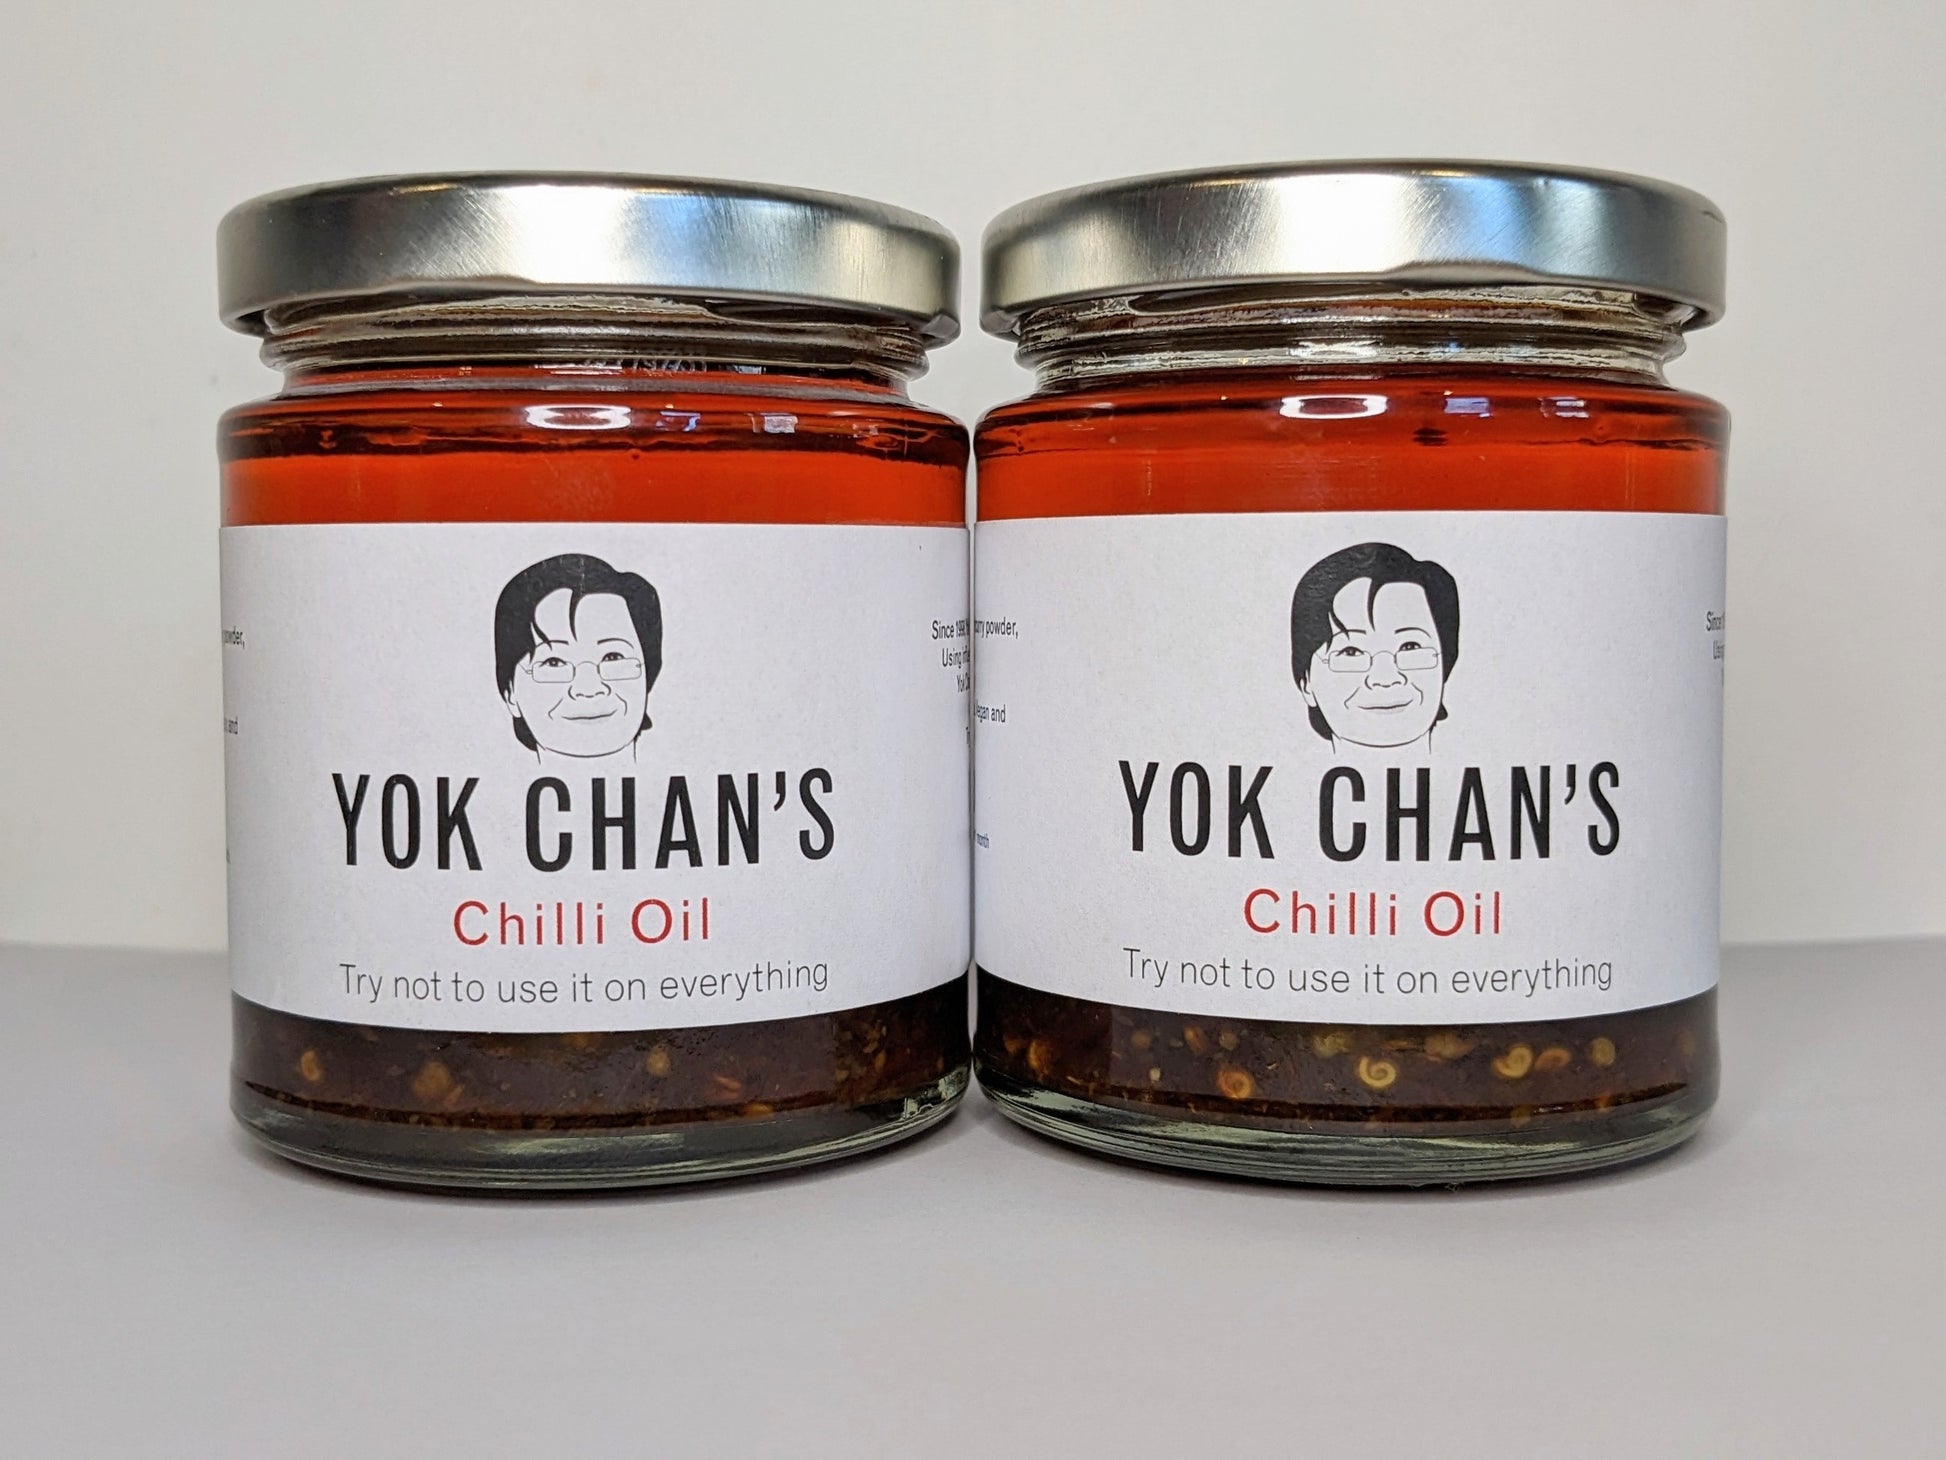 Yok Chan's Chilli Oil twin pack side by side